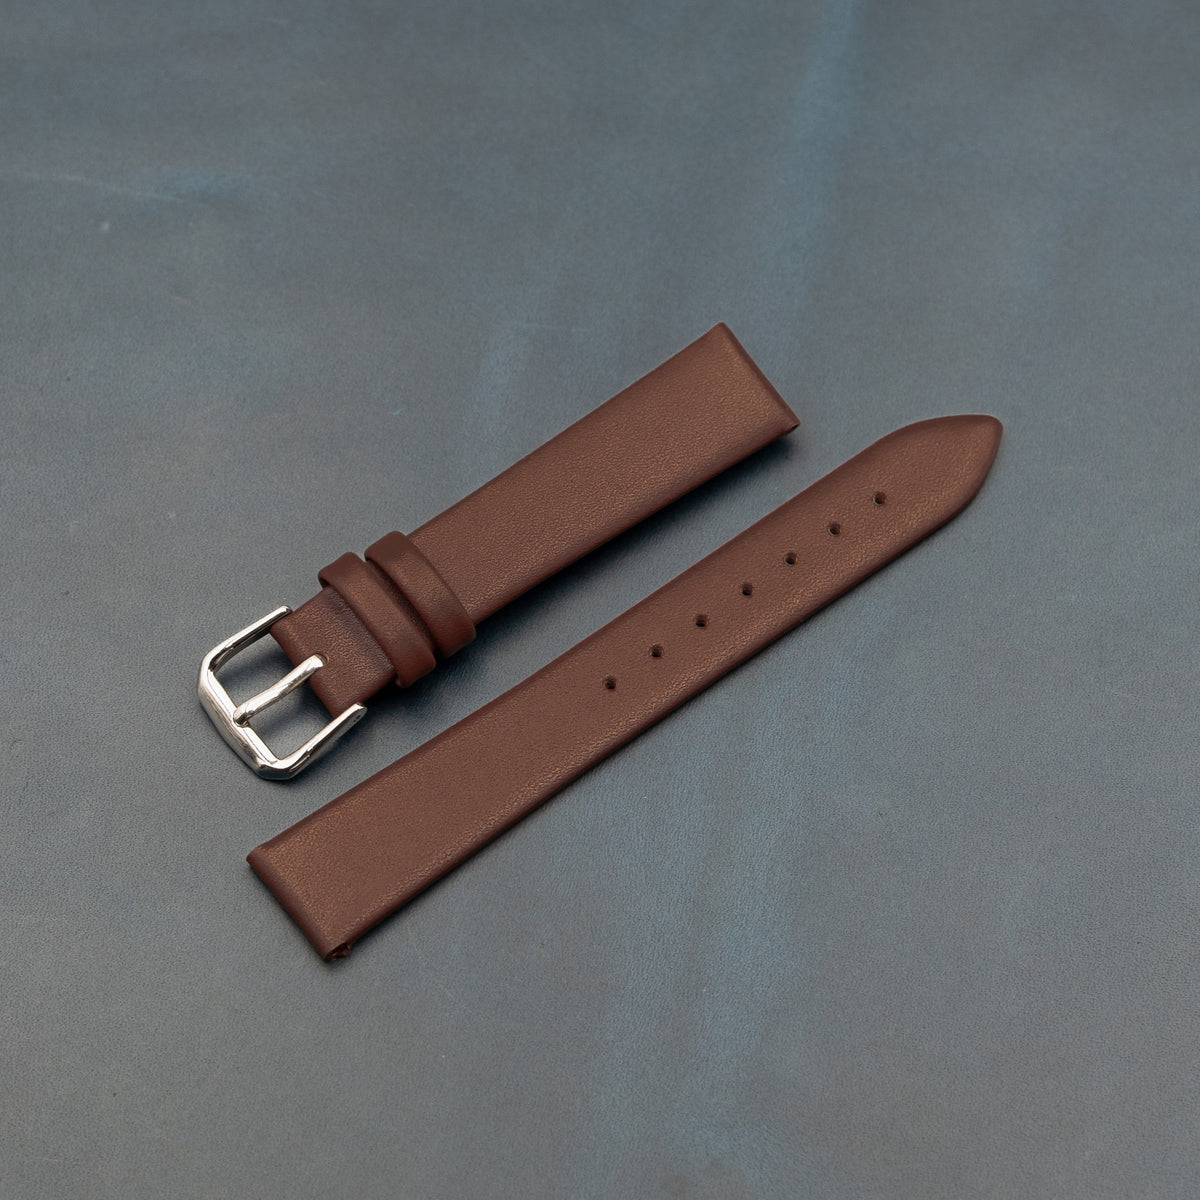 Unstitched Smooth Leather Watch Strap in Tan (12mm) - Nomad Watch Works MY